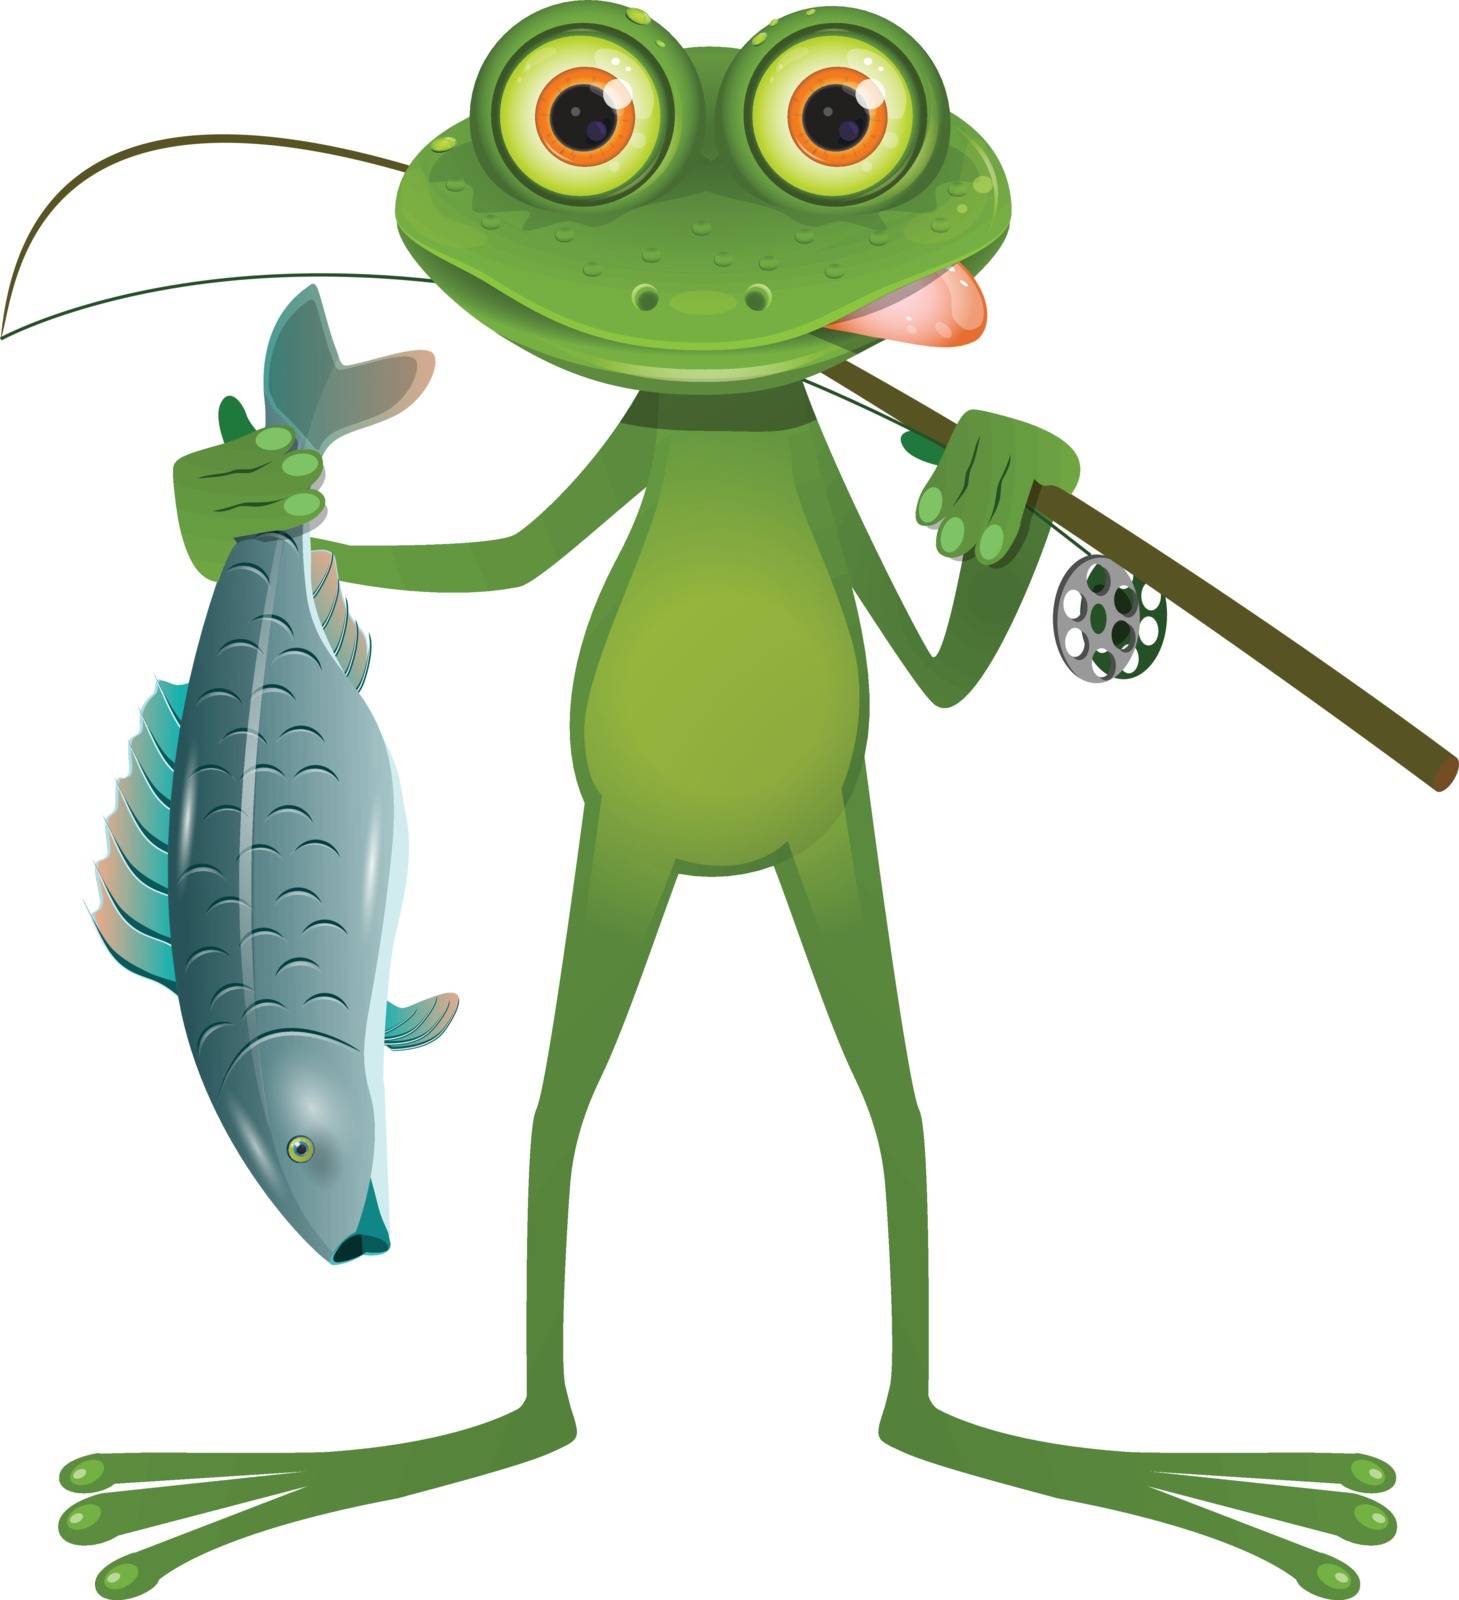 Goggle-eyed Frog Fisherman by brux